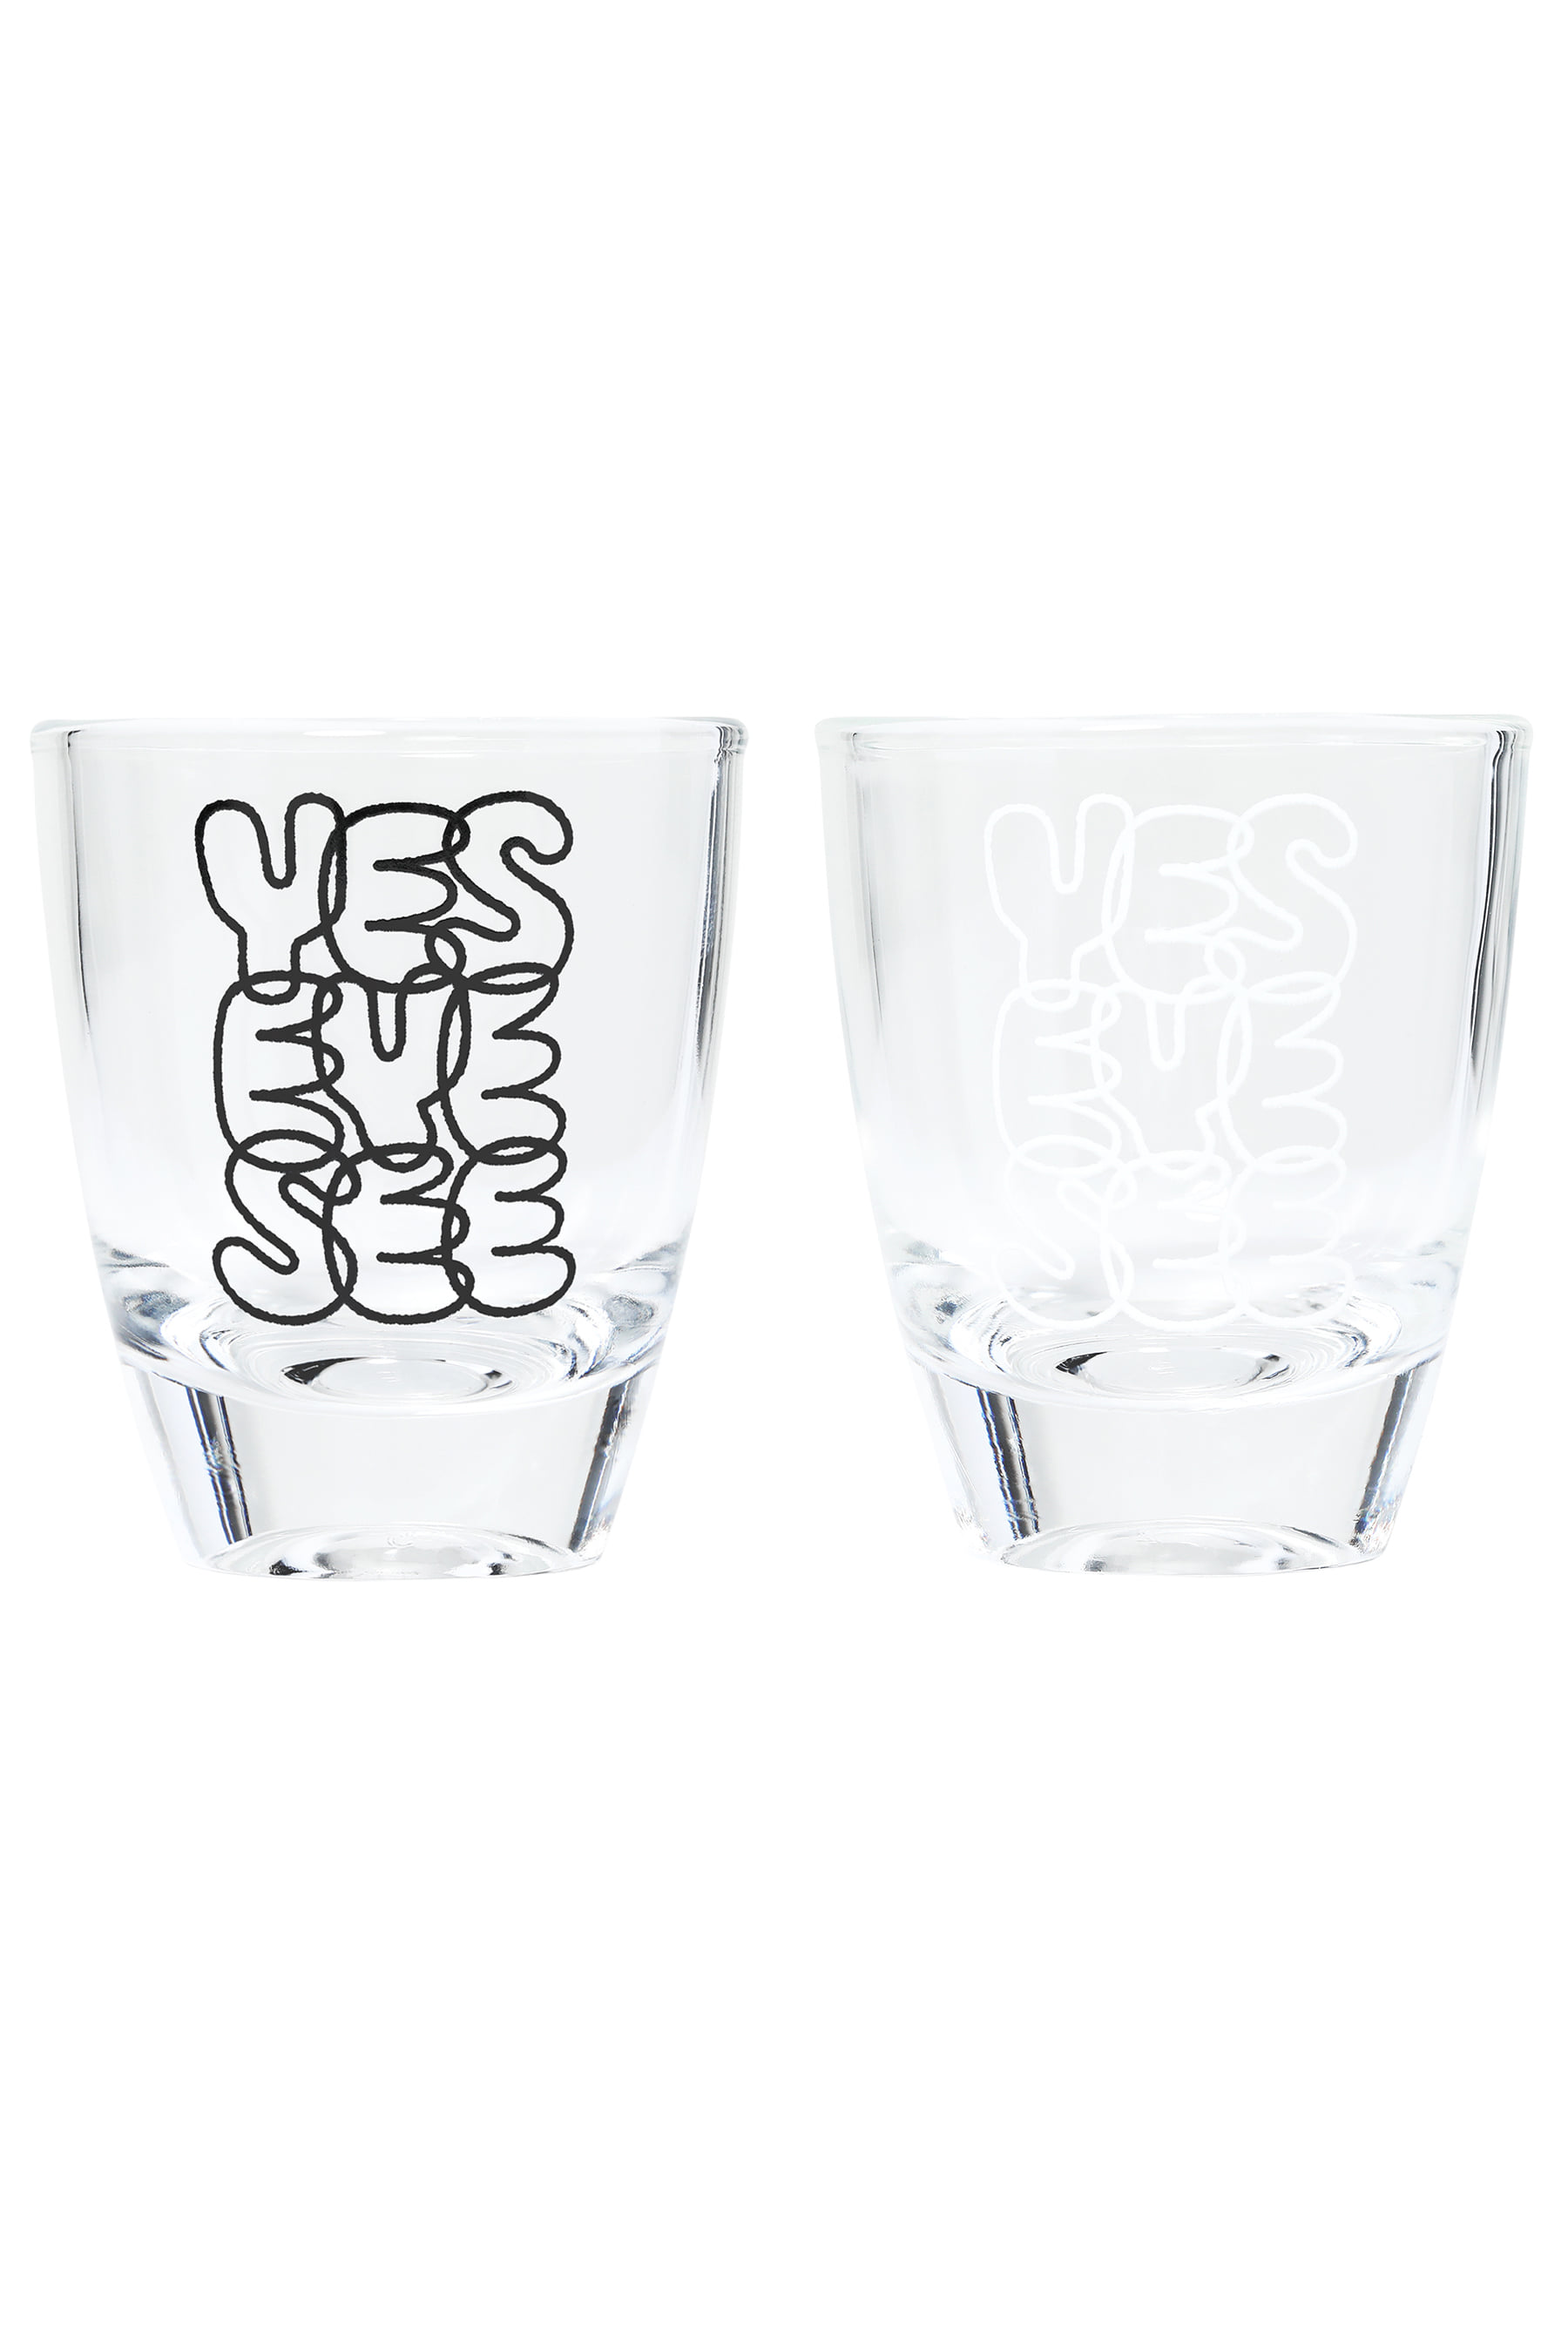 Y.E.S Shot Glass Water